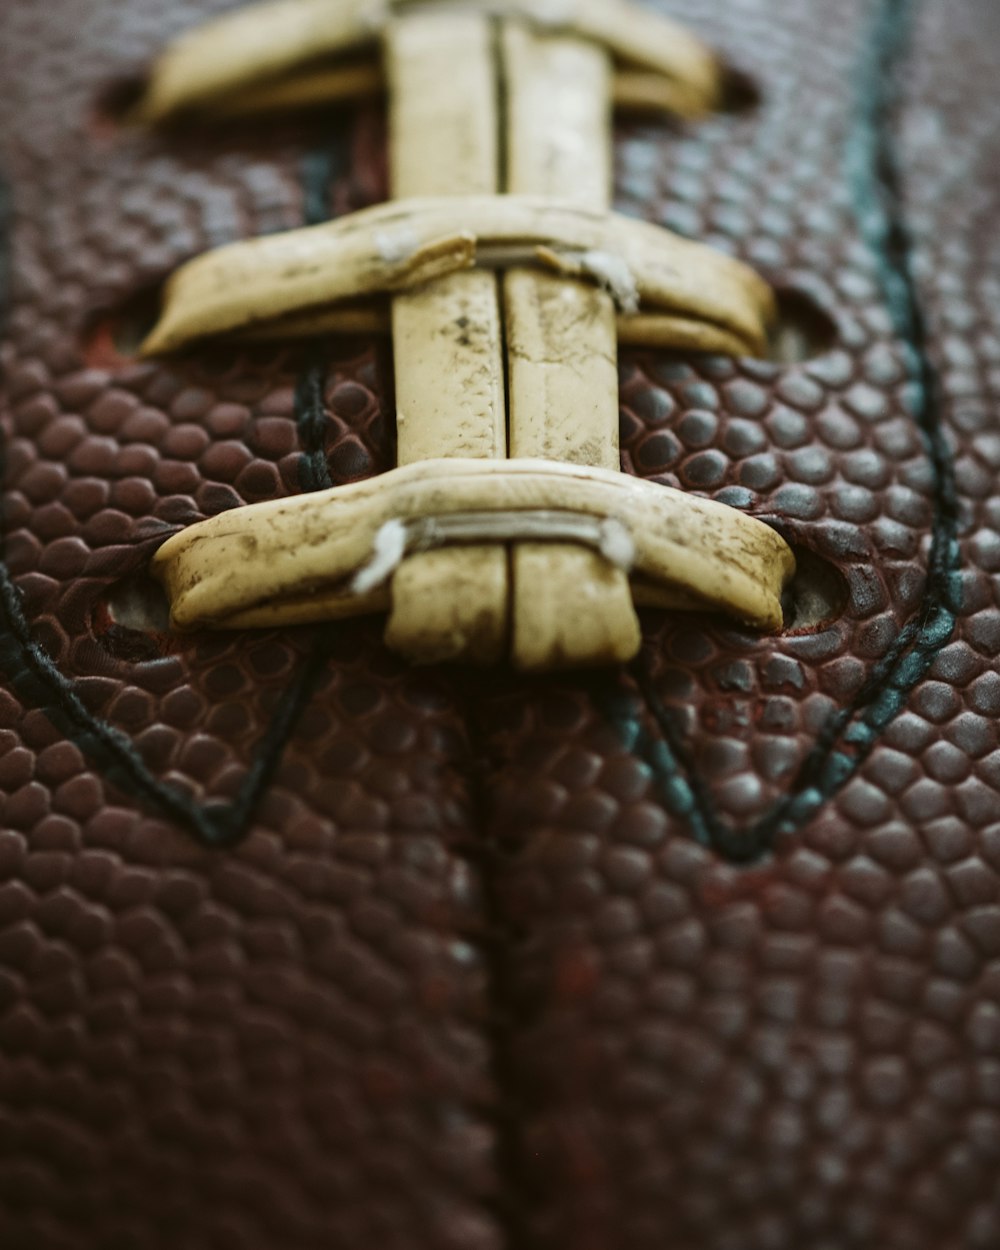 a close up of a leather object with a banana on it